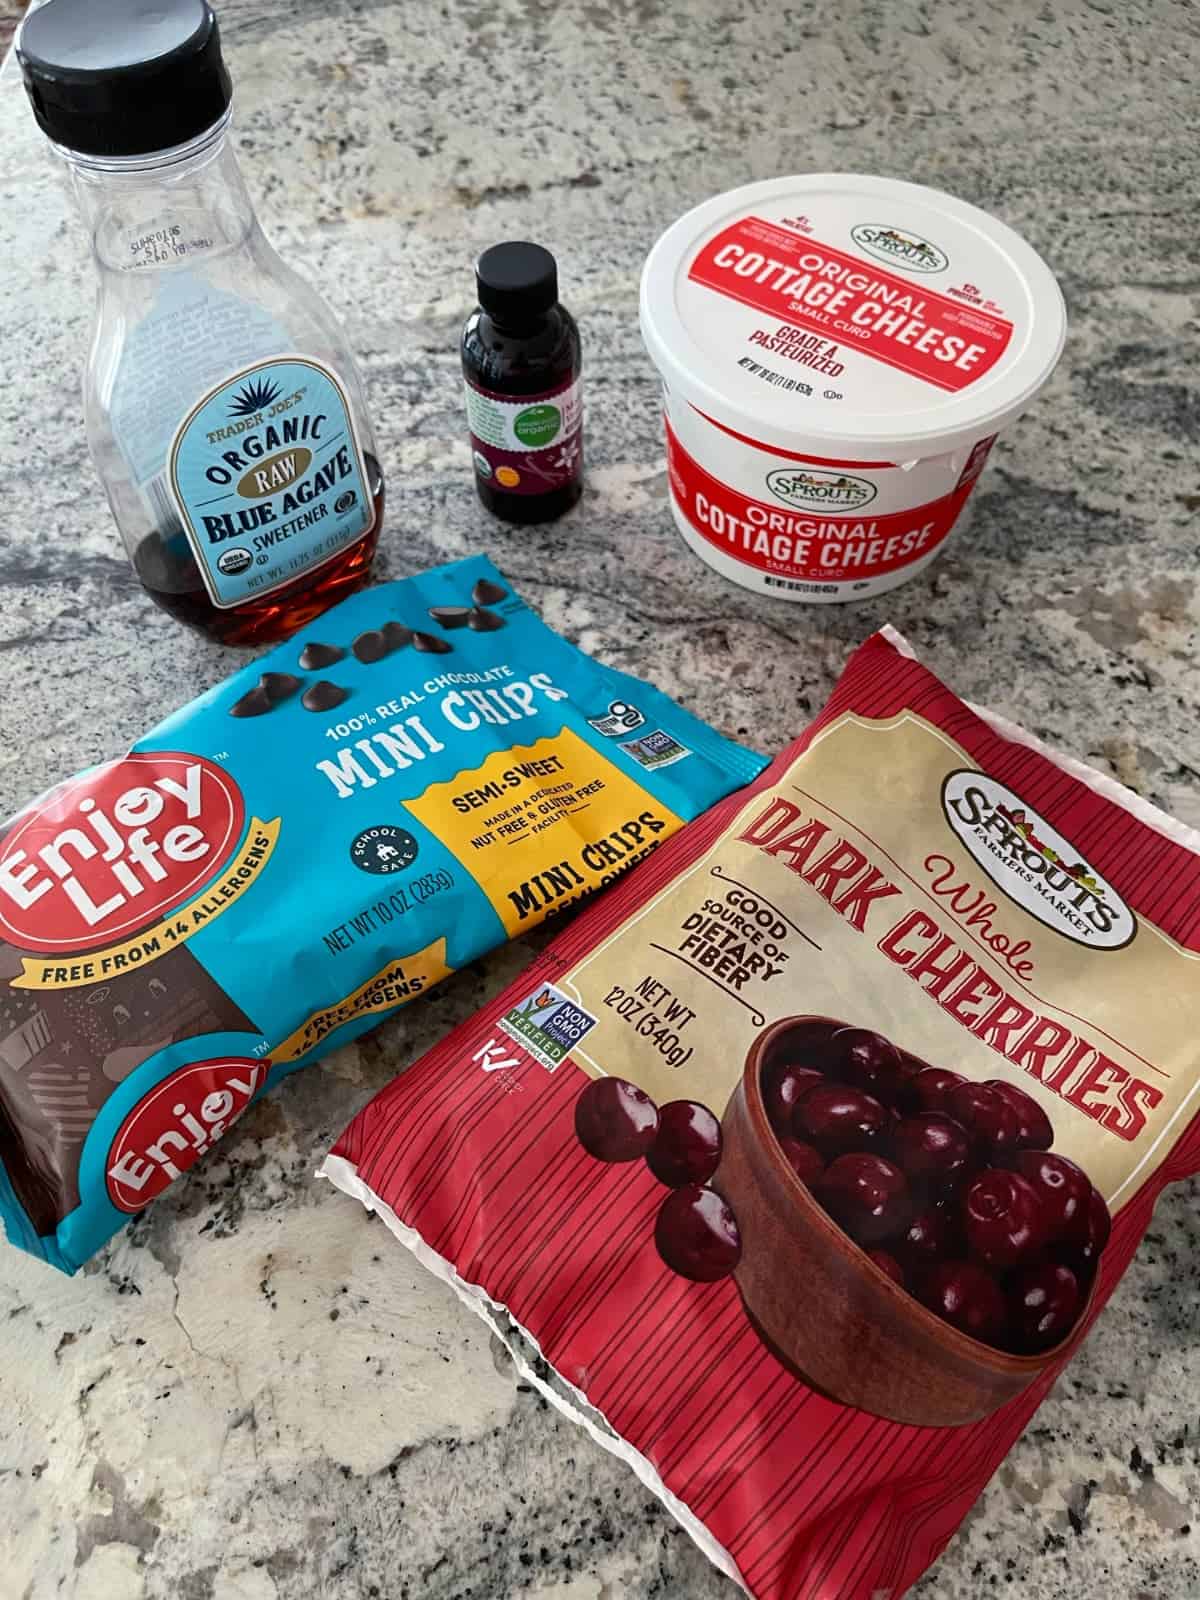 Ingredients including cottage cheese, mini chocolate chips, frozen black cherries, agave nectar and vanilla extract.